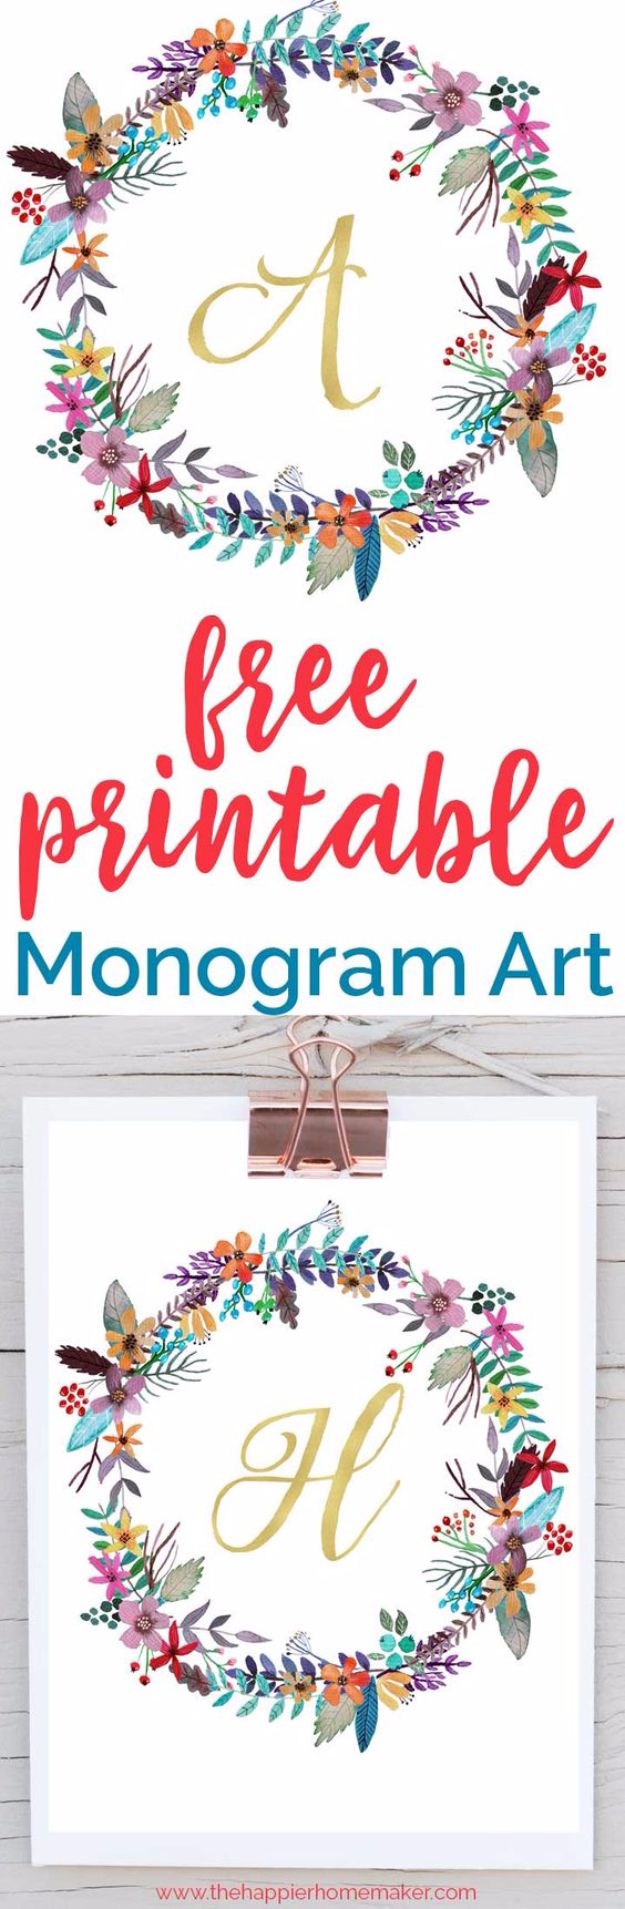 Free Printables For Your Walls - Free Printable Monogram Art - Best Free Prints for Wall Art and Picture to Print for Home and Bedroom Decor - Ideas for the Home, Organization - Quotes for Bedroom and Kitchens, Vintage Bathroom Pictures - Downloadable Printable for Kids - DIY and Crafts by DIY JOY 